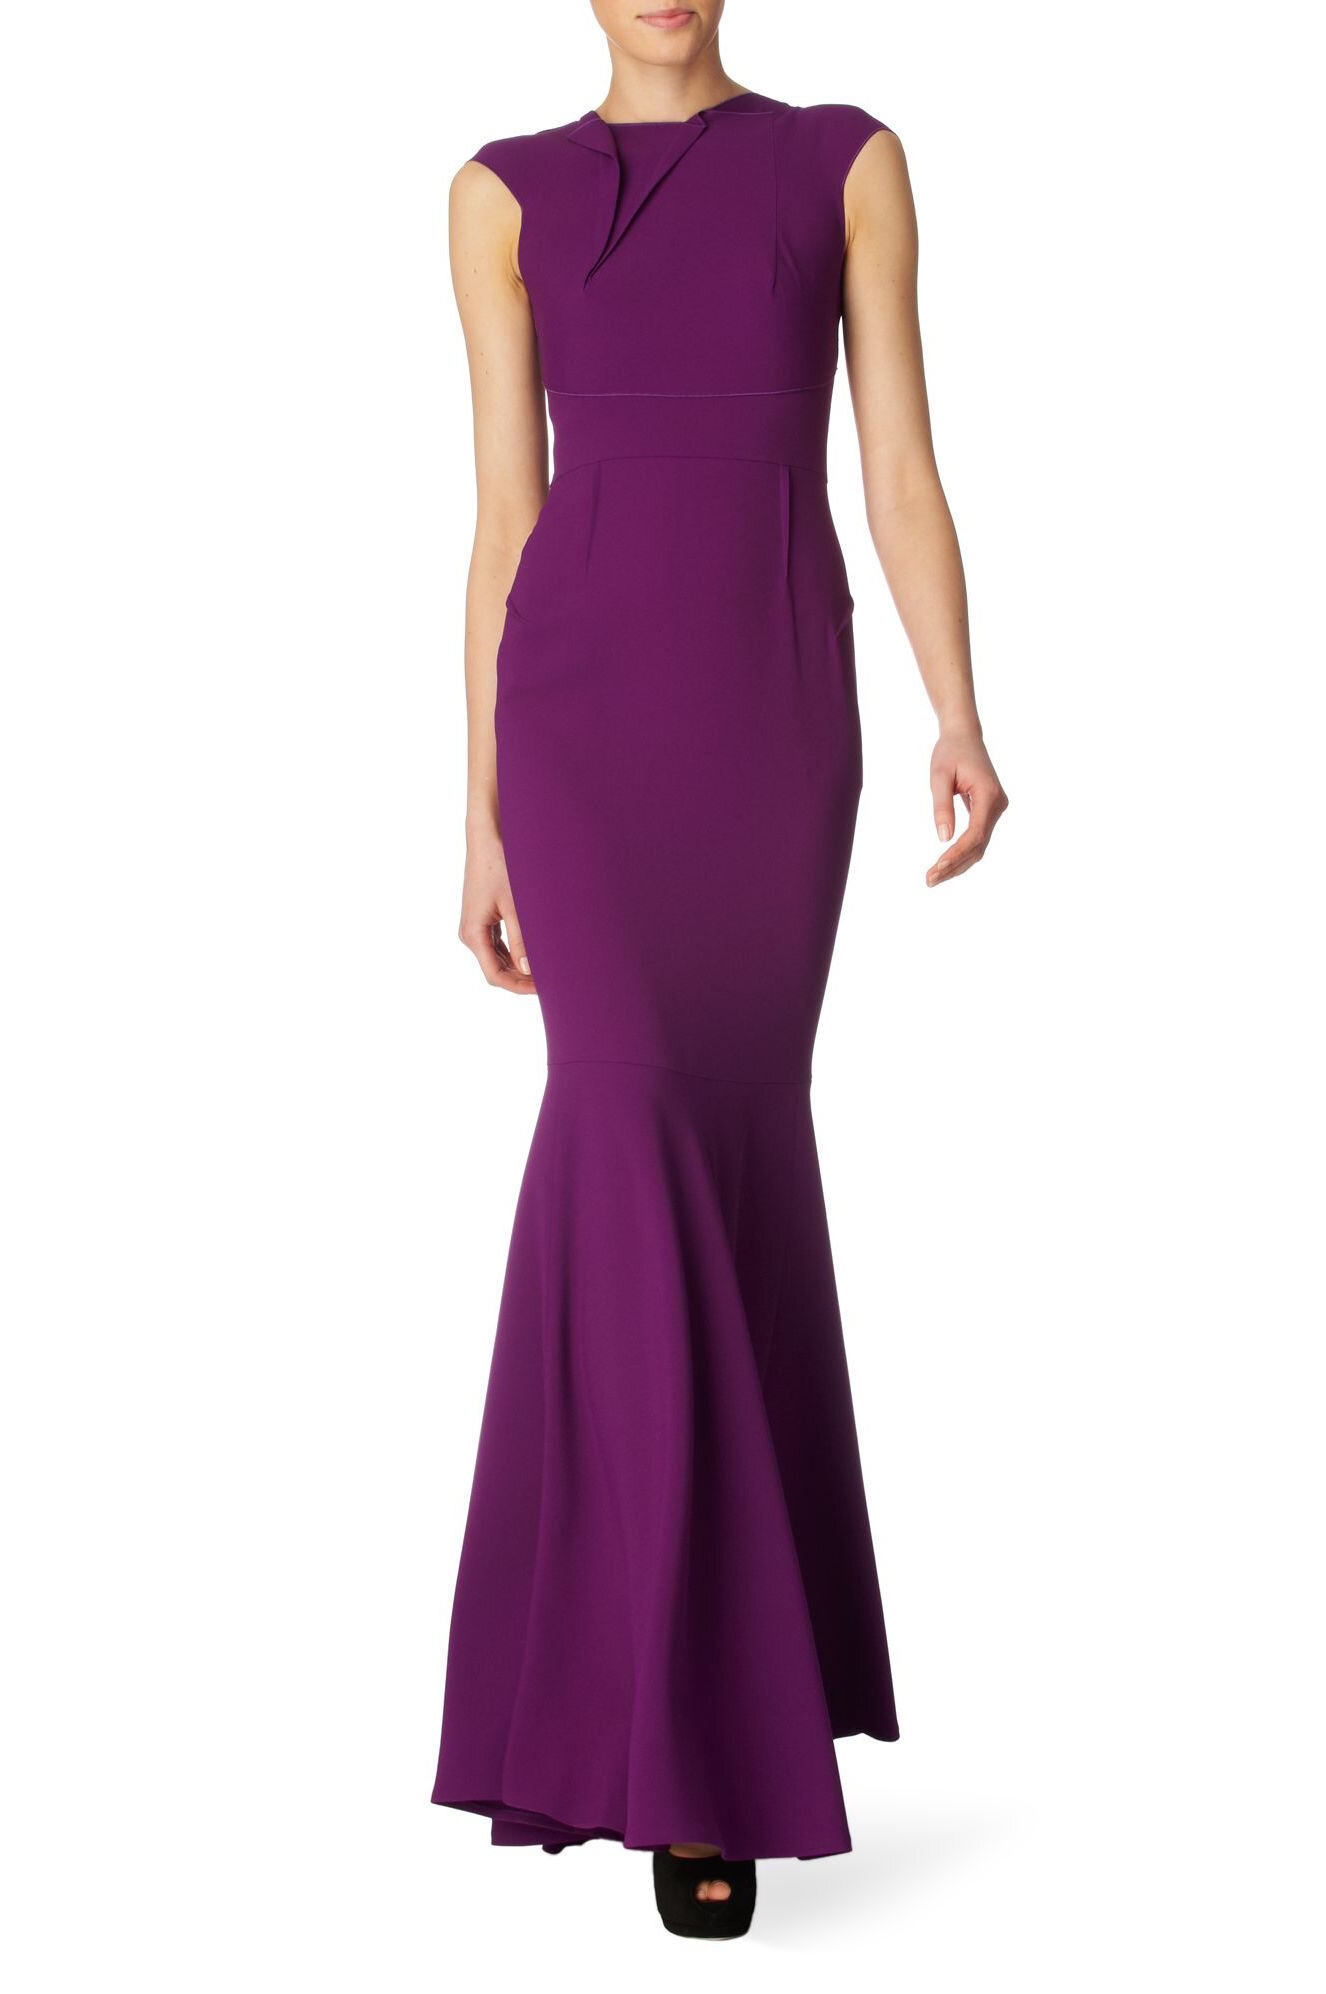 RM by Roland Mouret Copperfield Gown in Purple.jpg